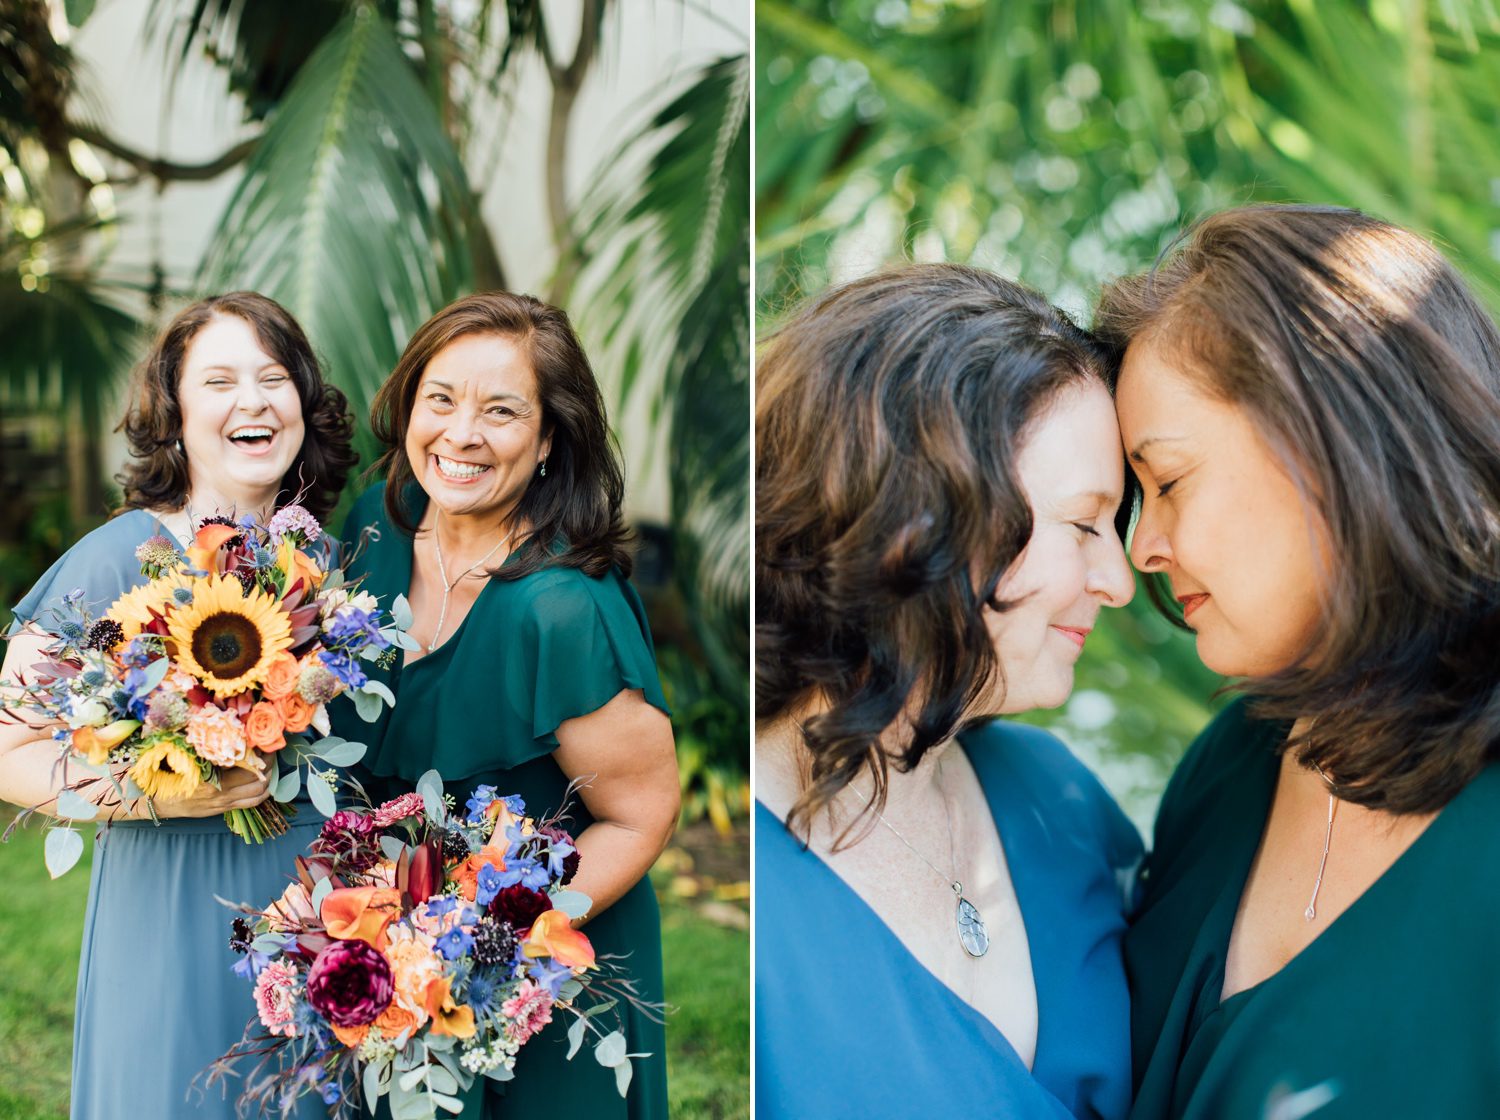 Two Brides holding colorful wedding bouquet